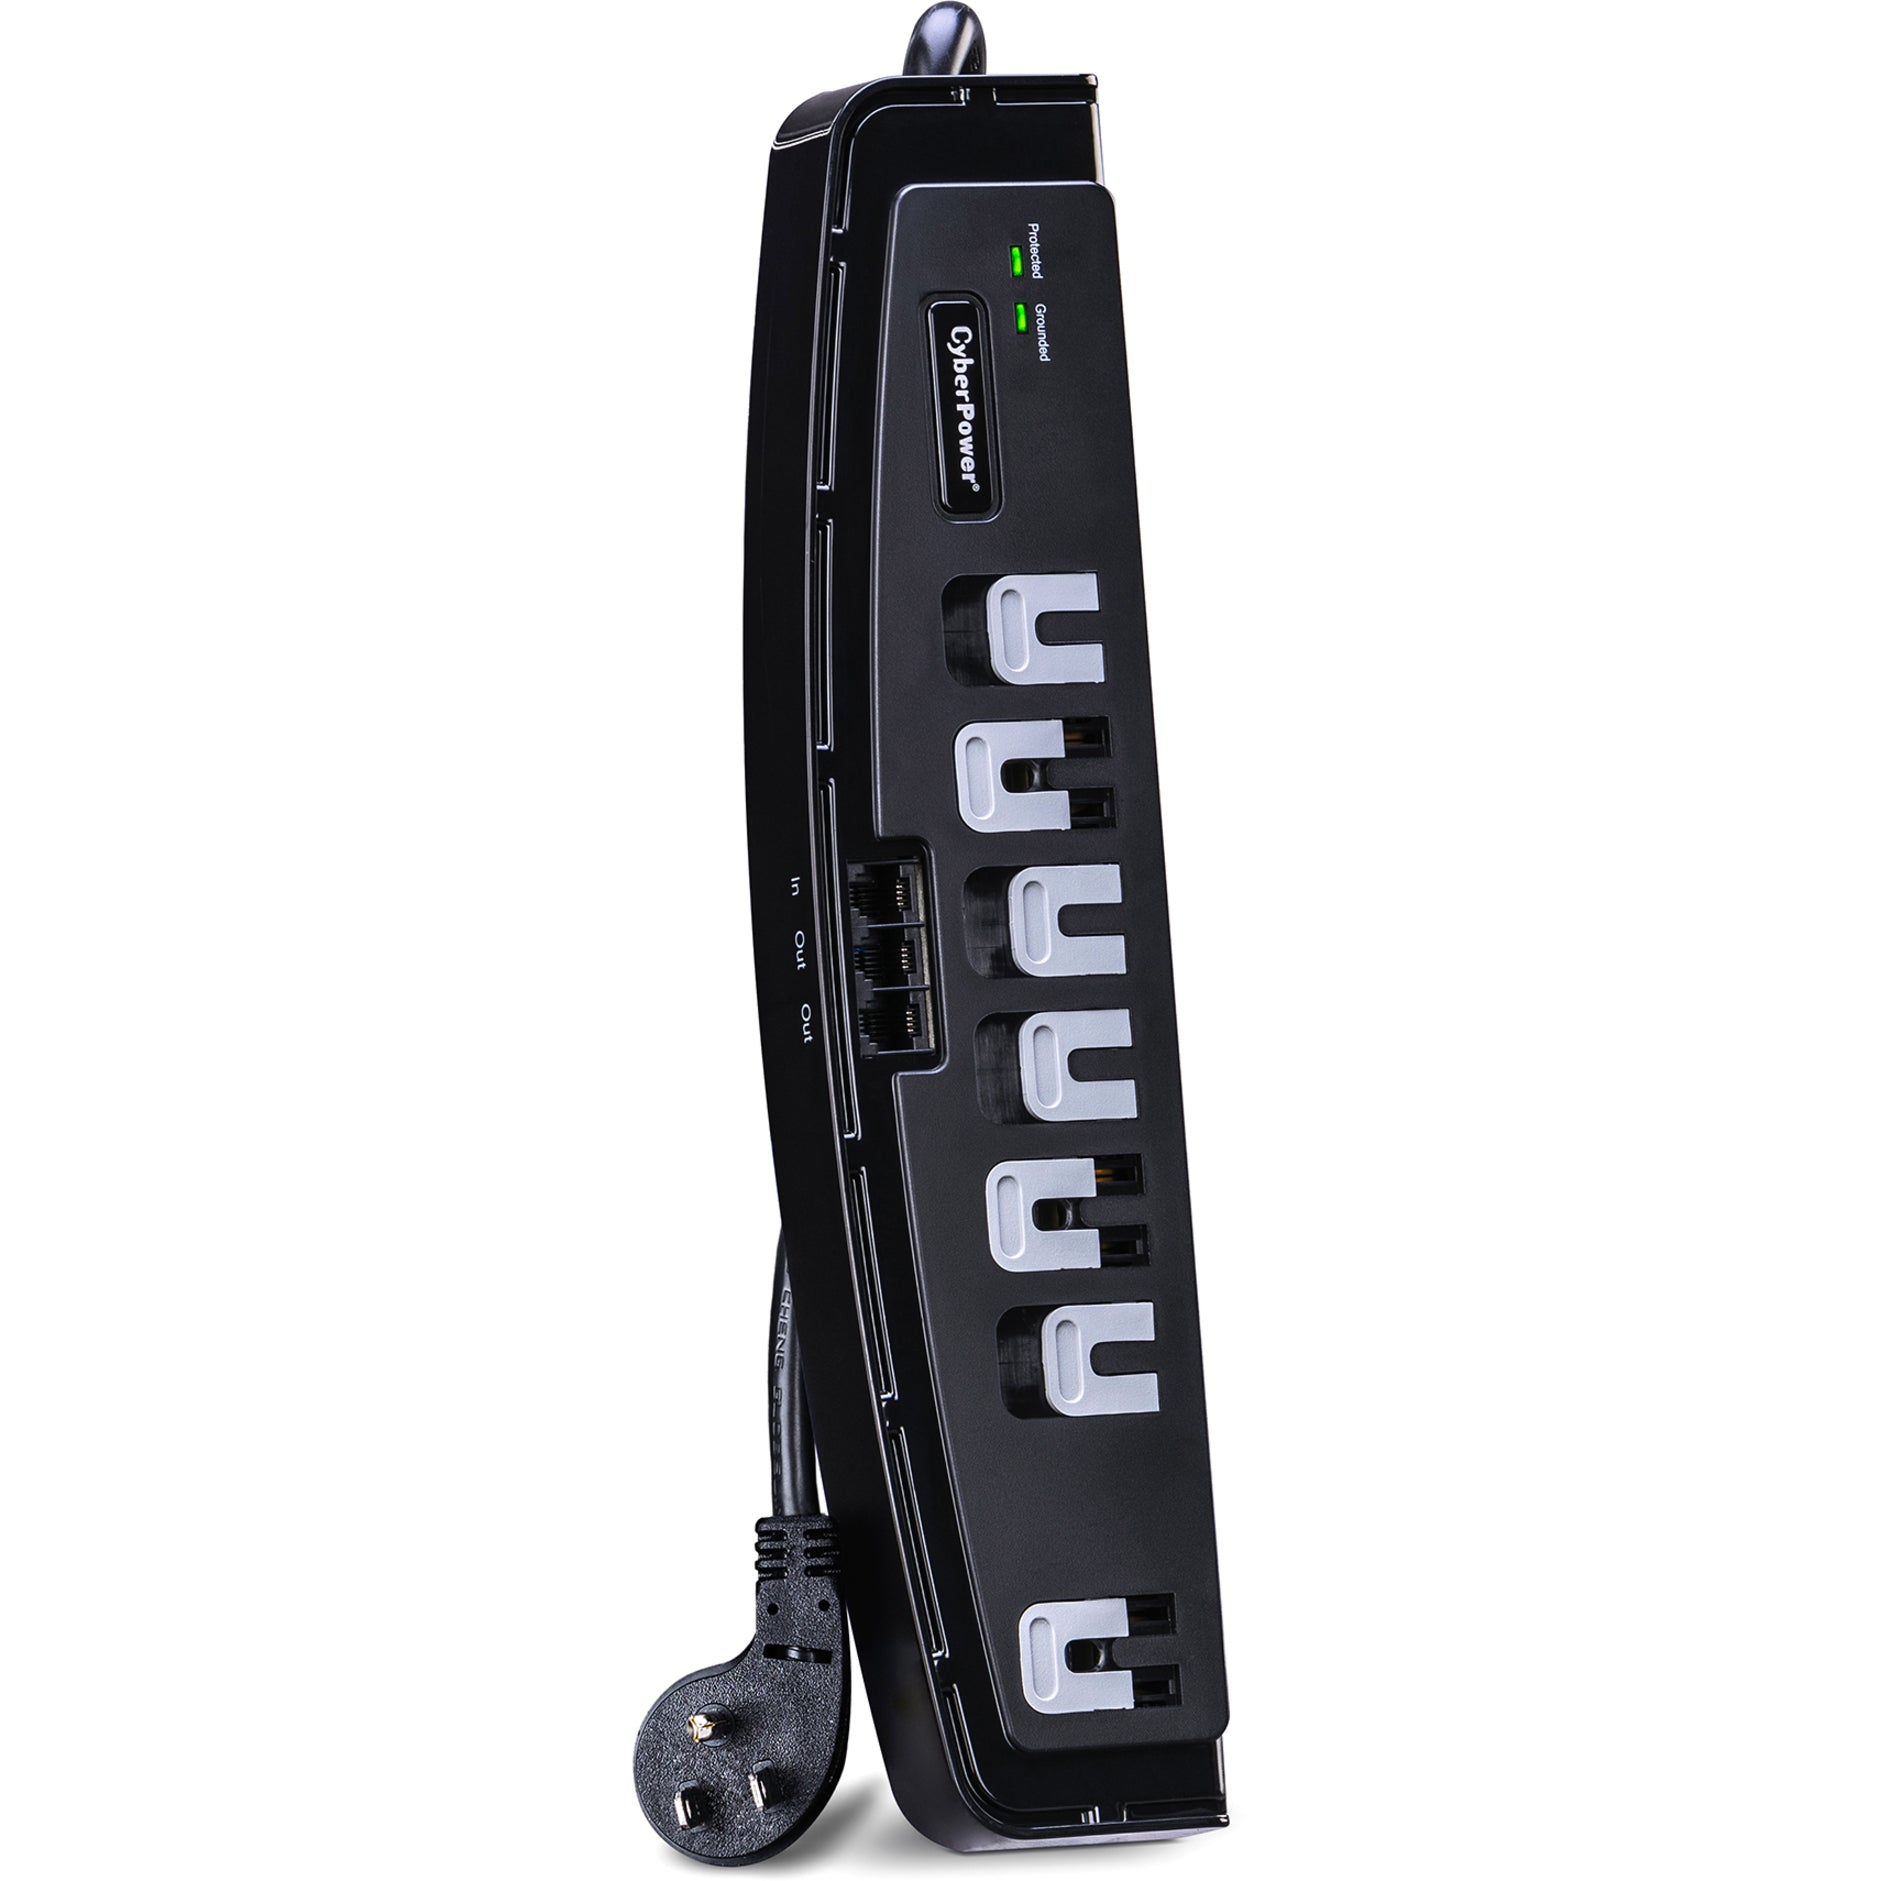 CyberPower CSP708T Professional 7-Outlets Surge Suppressor 8FT Cord and TEL, Lifetime Warranty, 1650 J